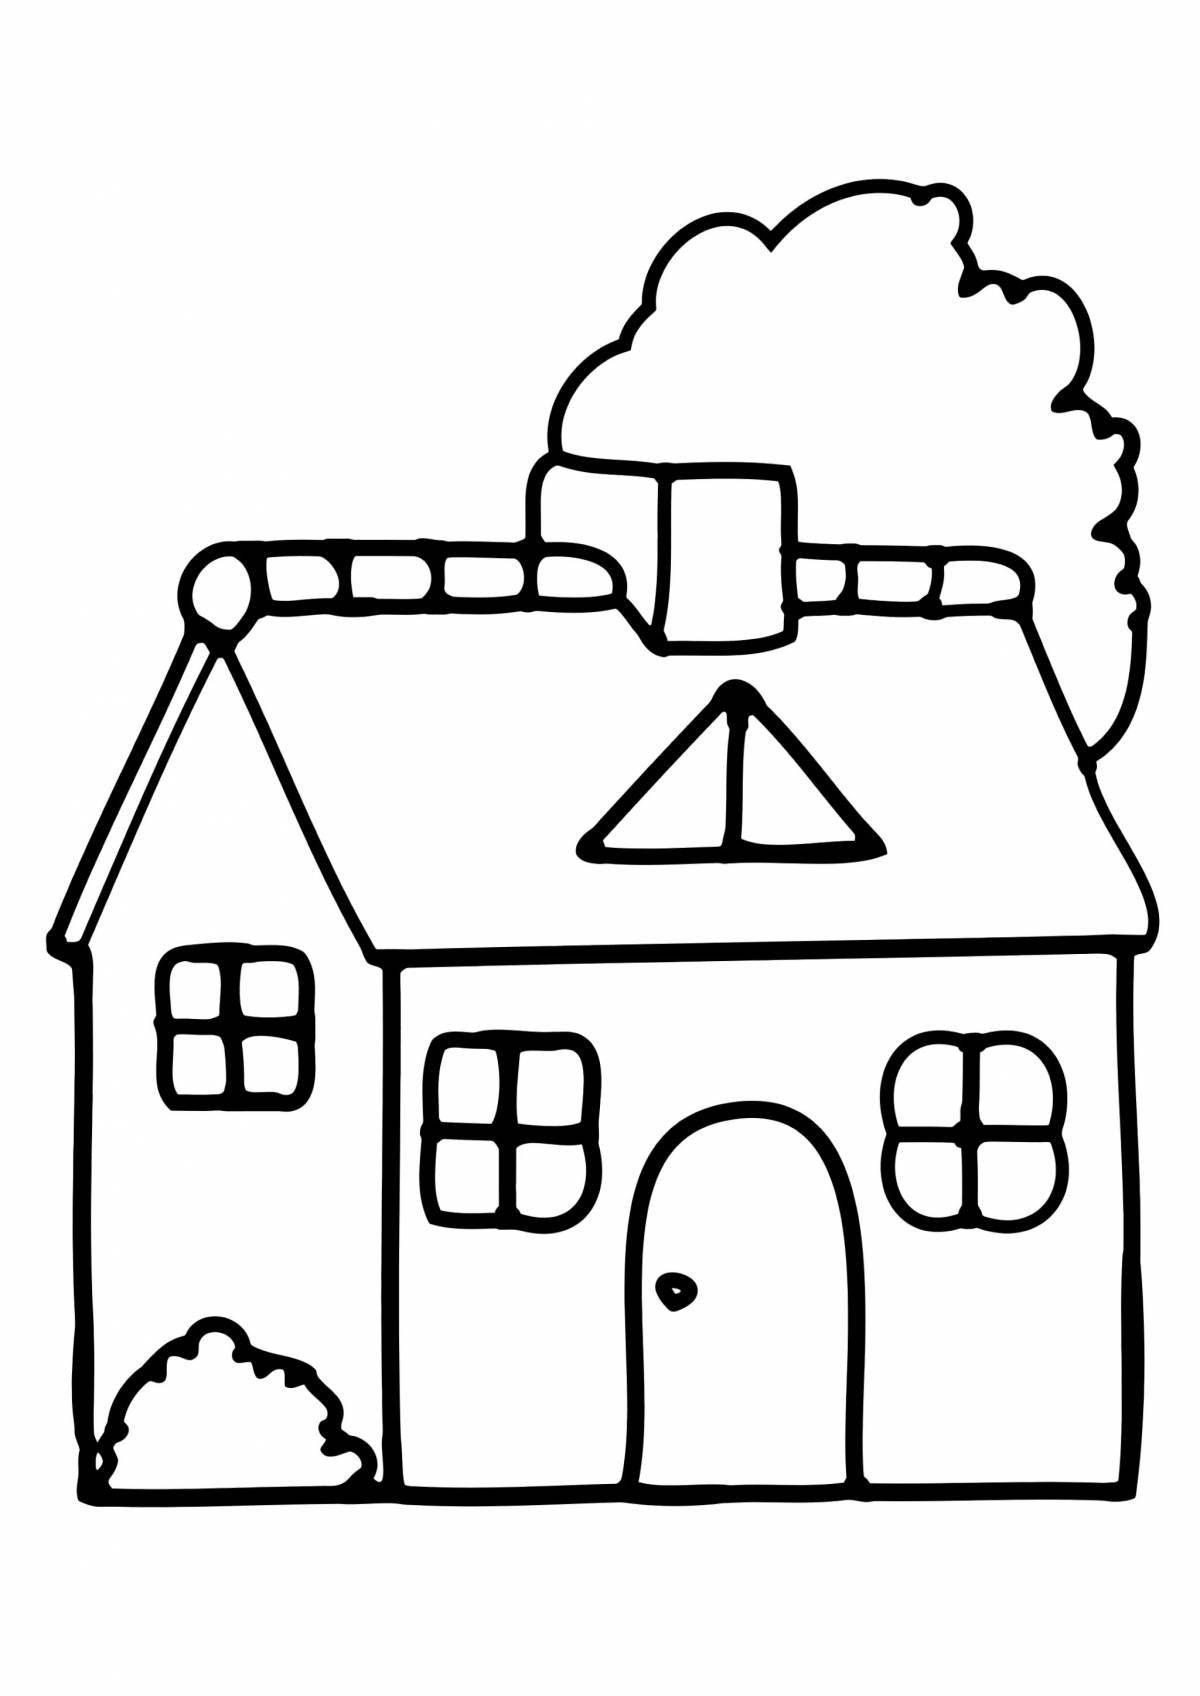 Amazing simple house coloring page for kids